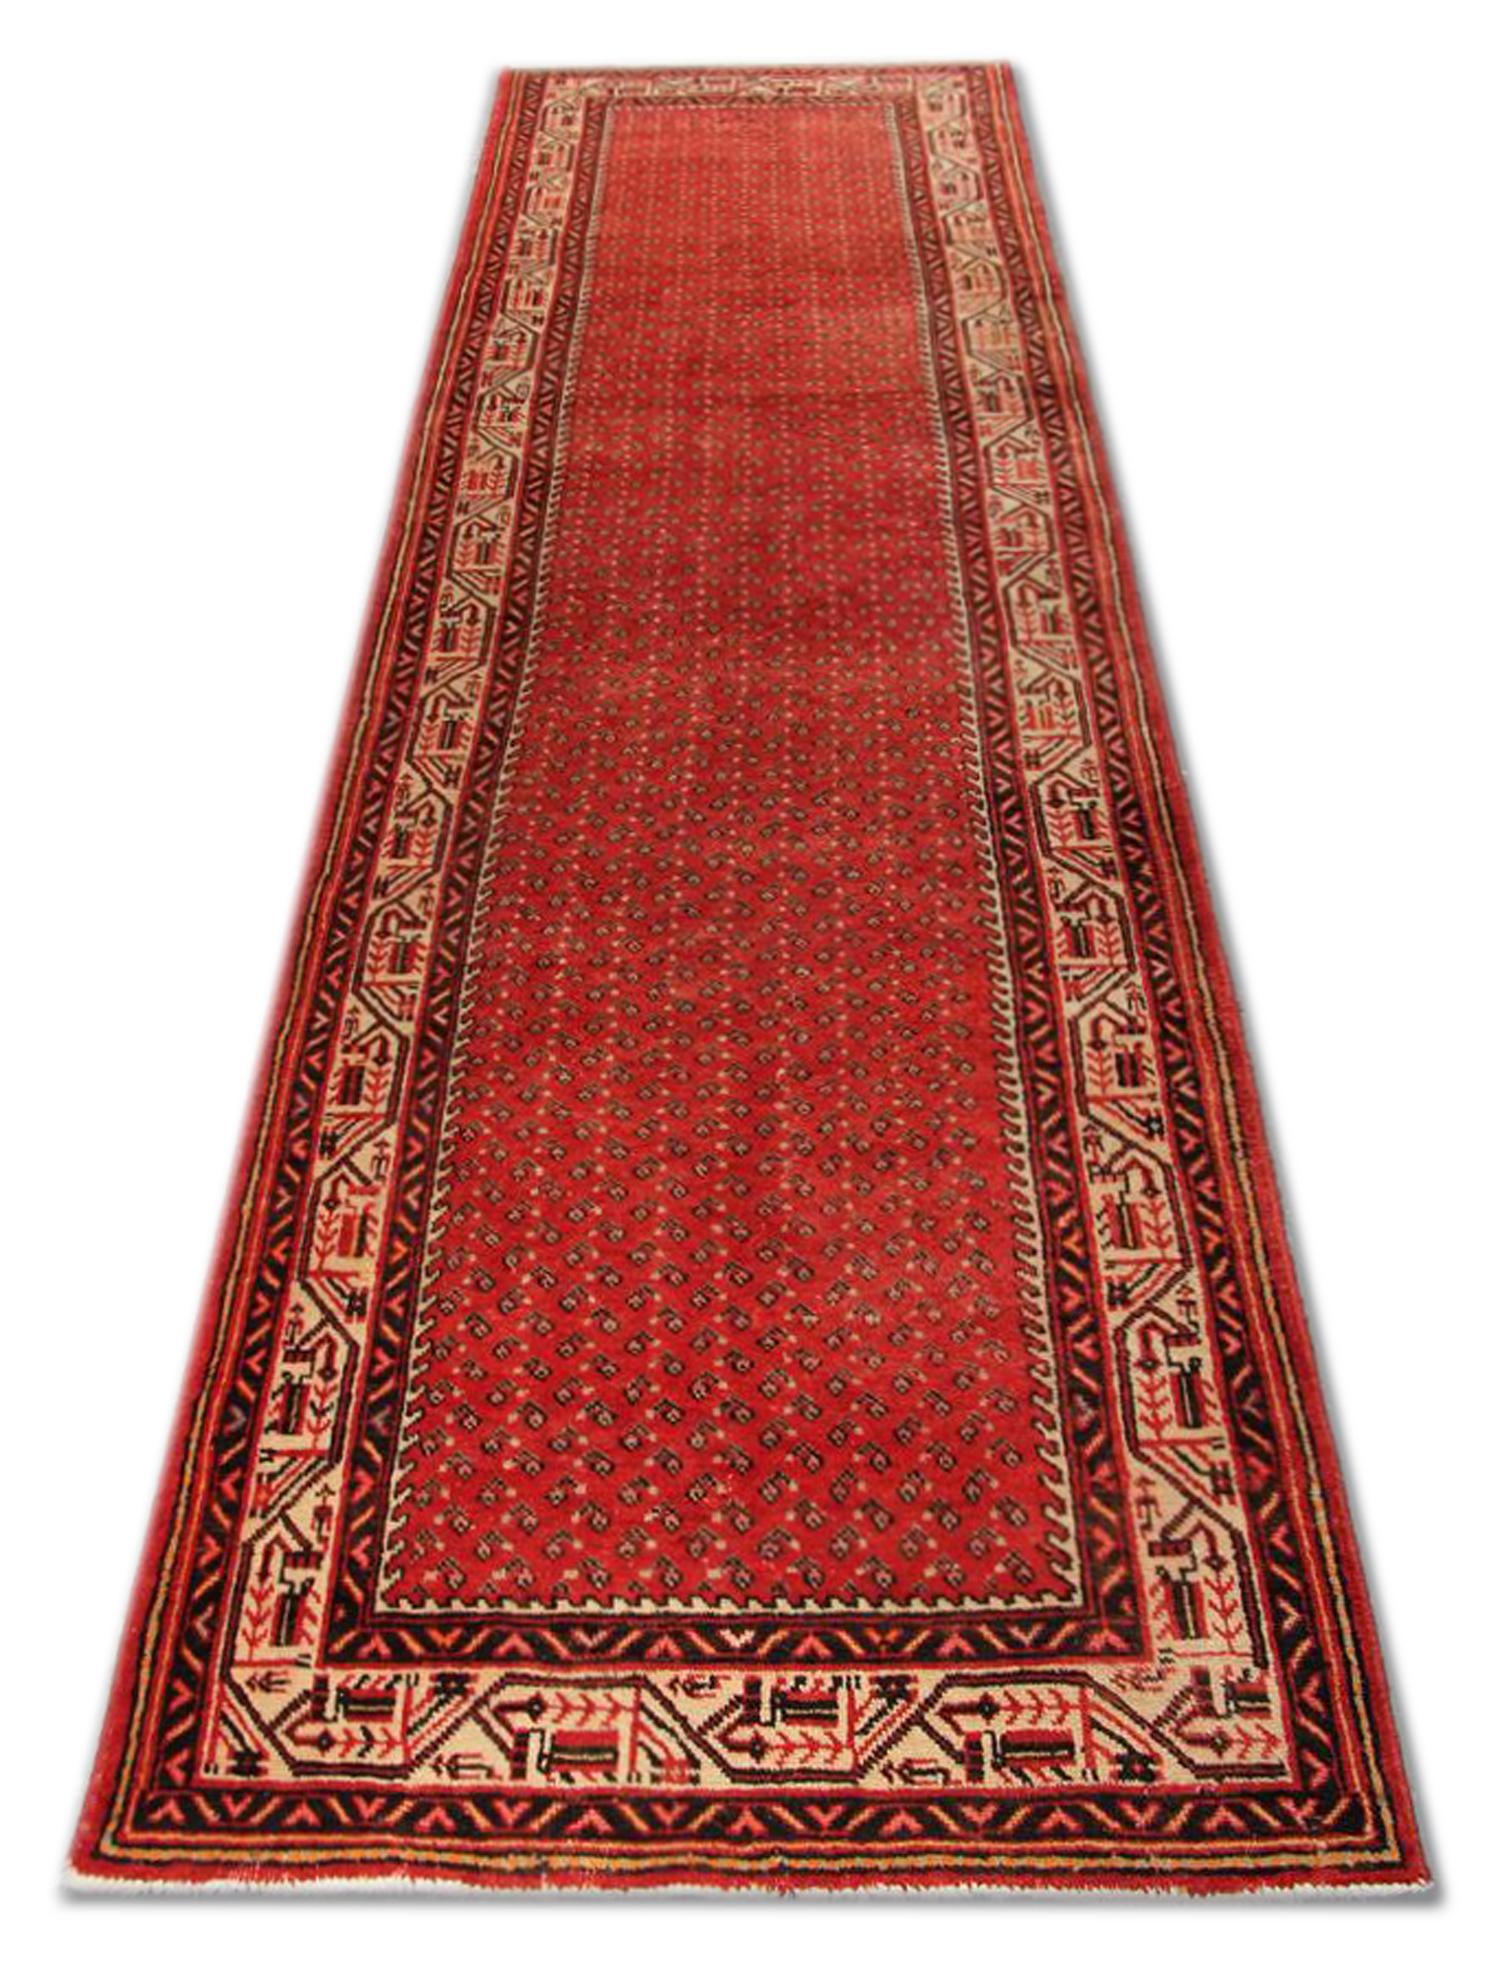 Looking to upgrade your floors with a Vintage Rug? This piece is sure to wow your guests…
This truly unique Runner rug has been hand-woven with a highly detailed symmetrical, tribal motif design. Featuring a simple red cream colour palette that